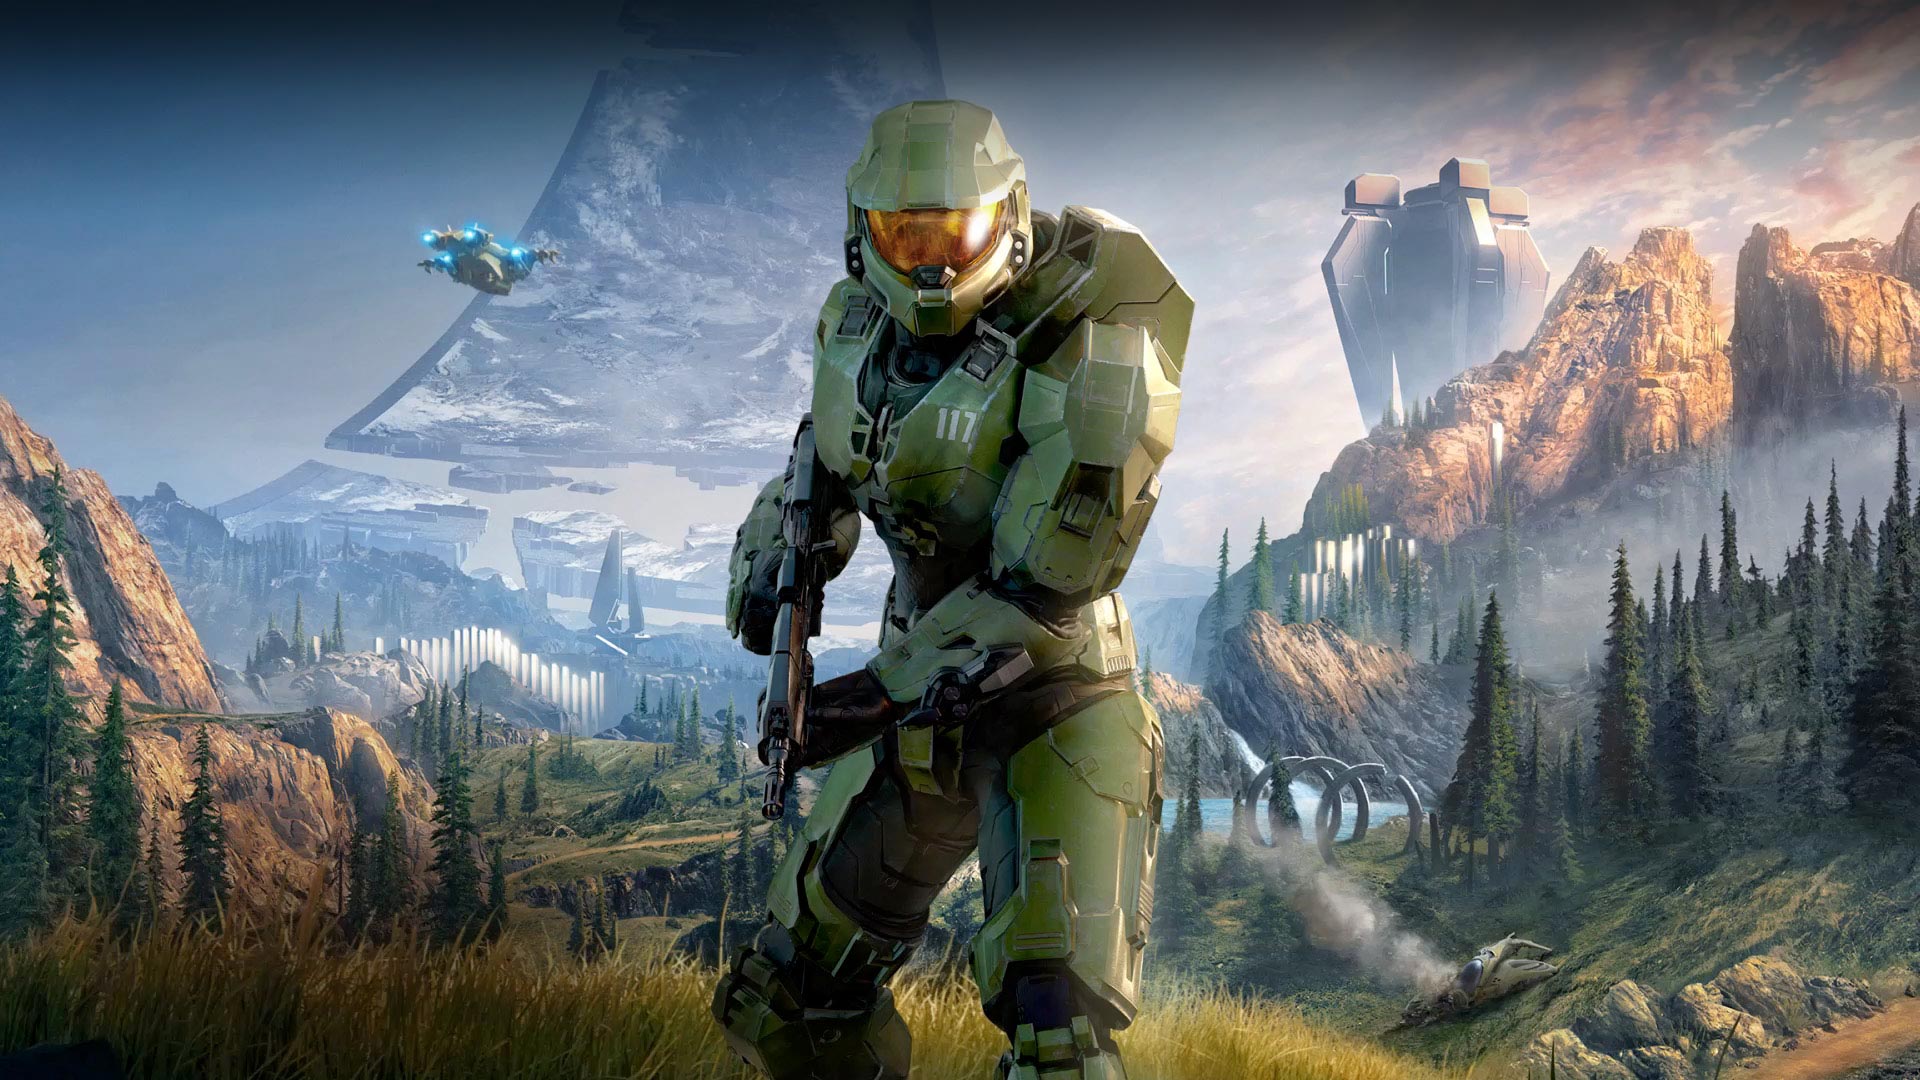 Halo Infinite: Available now with Game Pass | Xbox